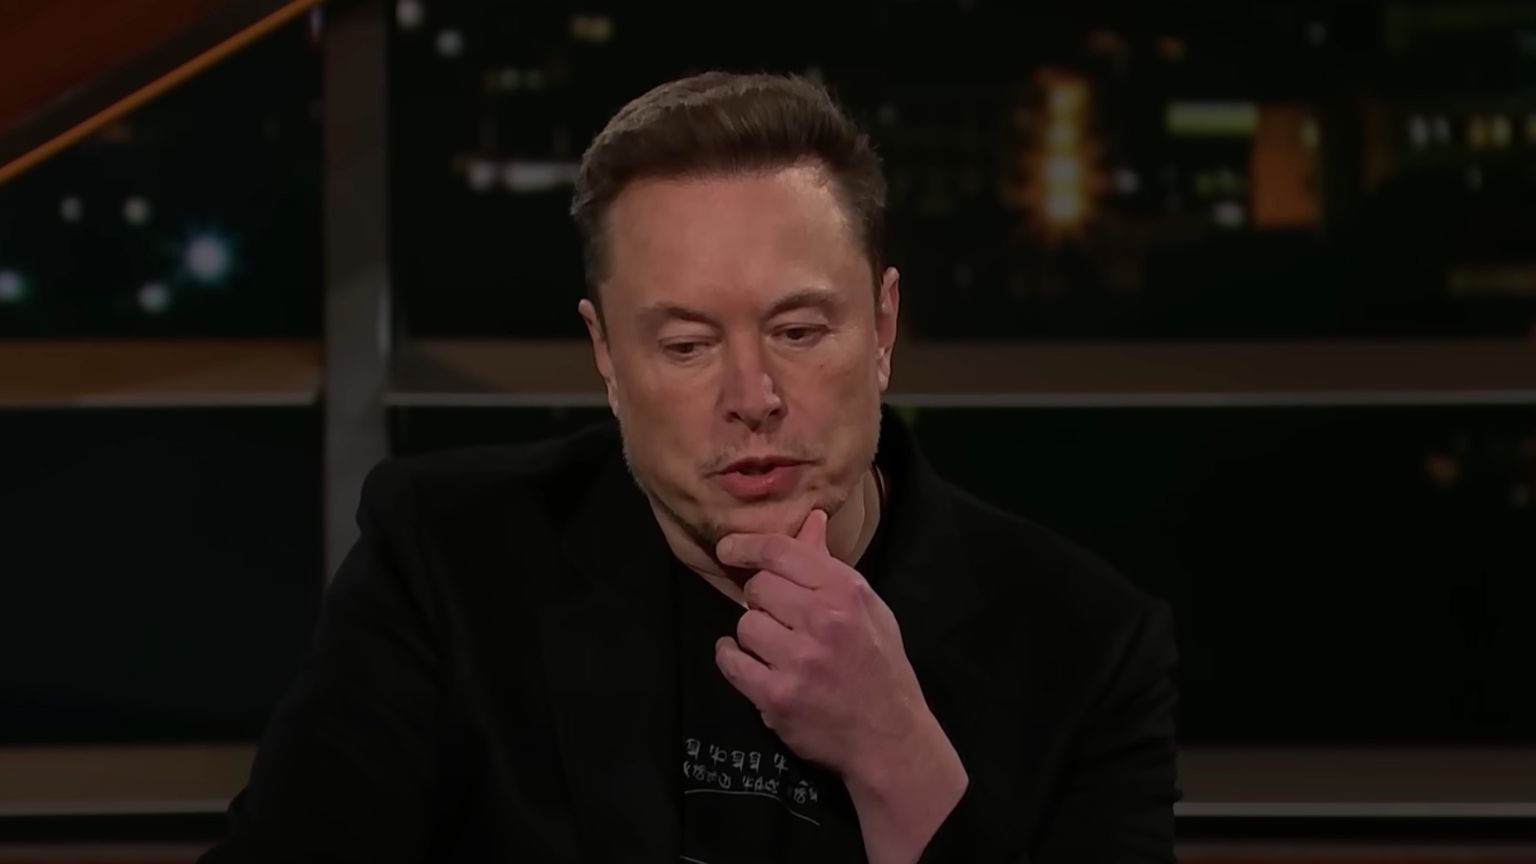 Elon Musk Battles Court Over Twitter: Will He Be Allowed to SPEAK Freely about Tesla?